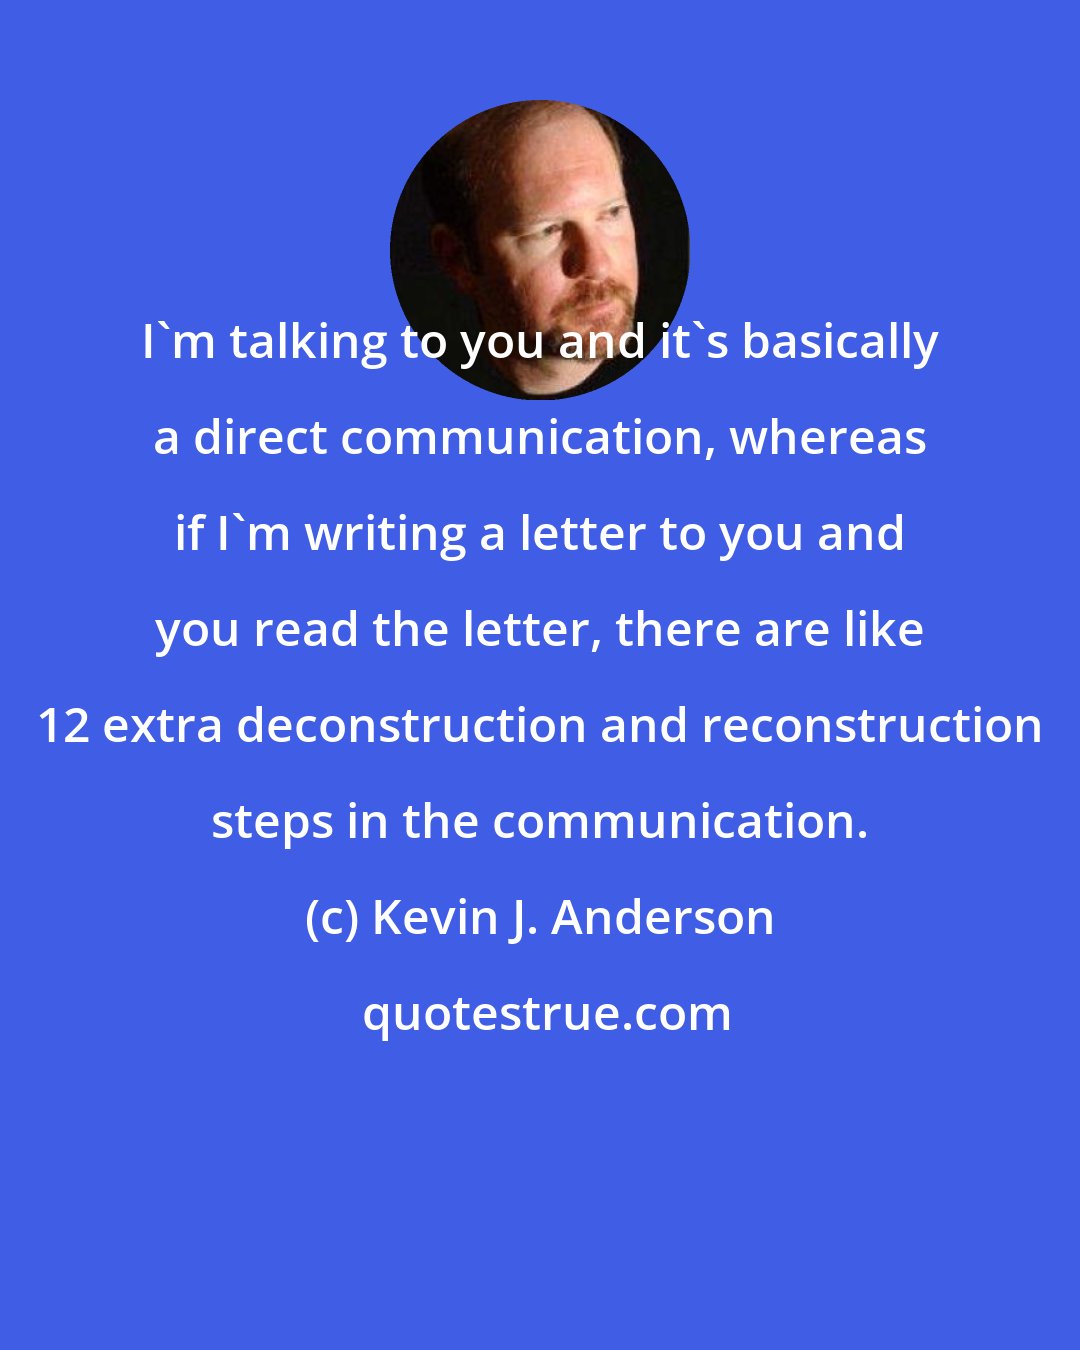 Kevin J. Anderson: I'm talking to you and it's basically a direct communication, whereas if I'm writing a letter to you and you read the letter, there are like 12 extra deconstruction and reconstruction steps in the communication.